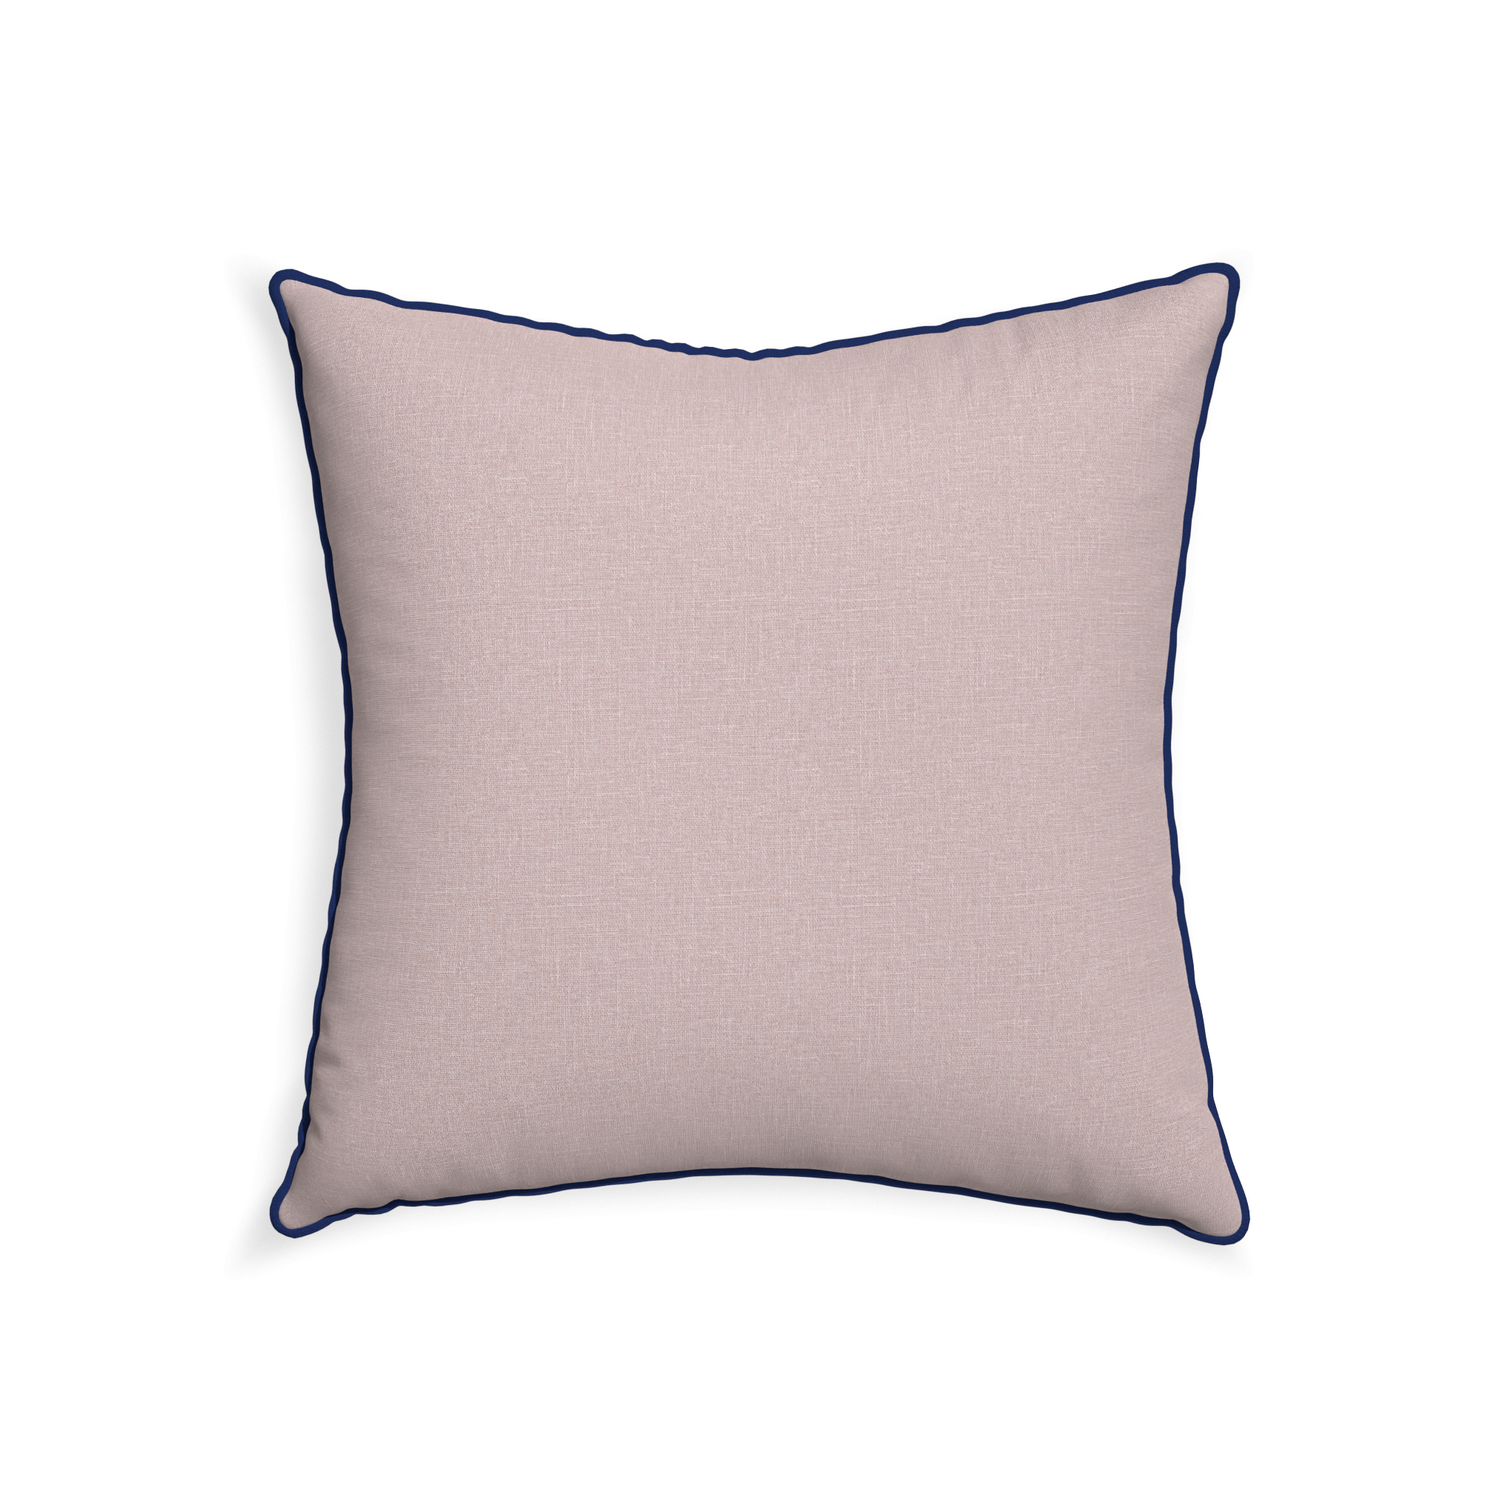 22-square orchid custom mauve pinkpillow with midnight piping on white background